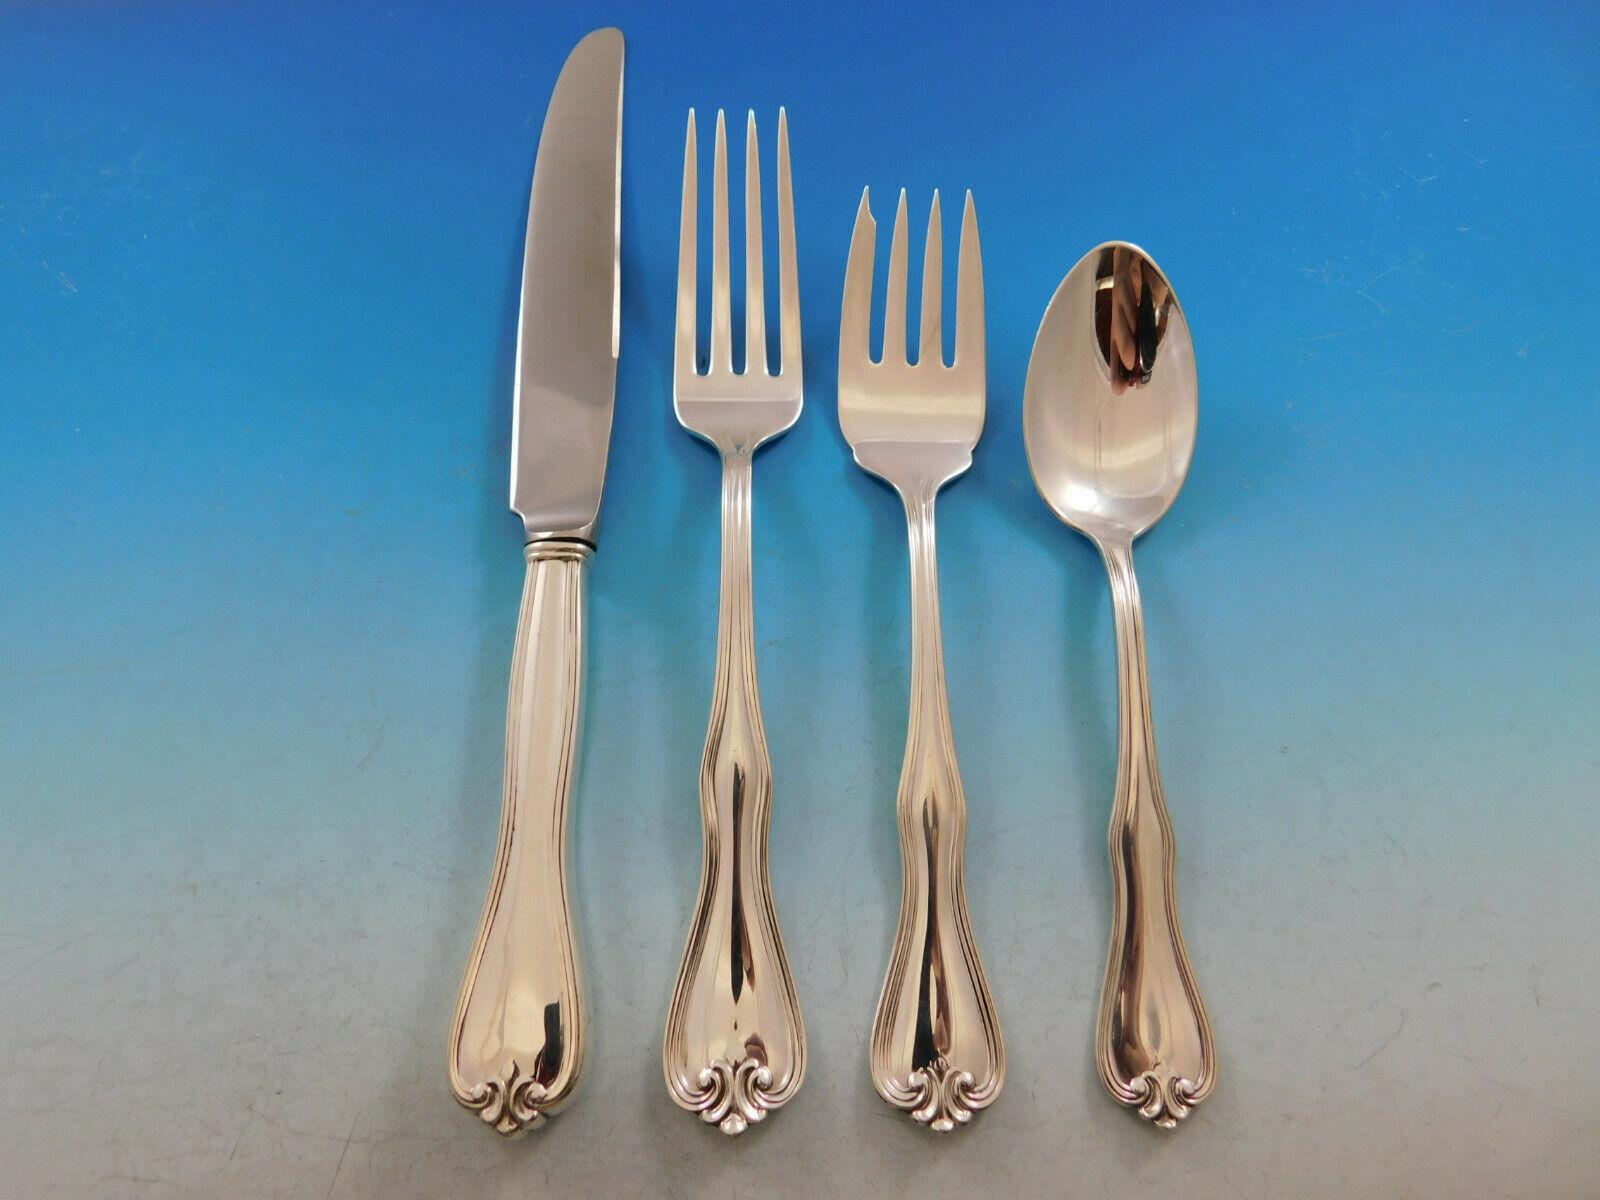 Rare Puritan by Frank Whiting, circa 1905, sterling silver flatware set, 74 pieces. This set includes:
12 Knives, 8 5/8